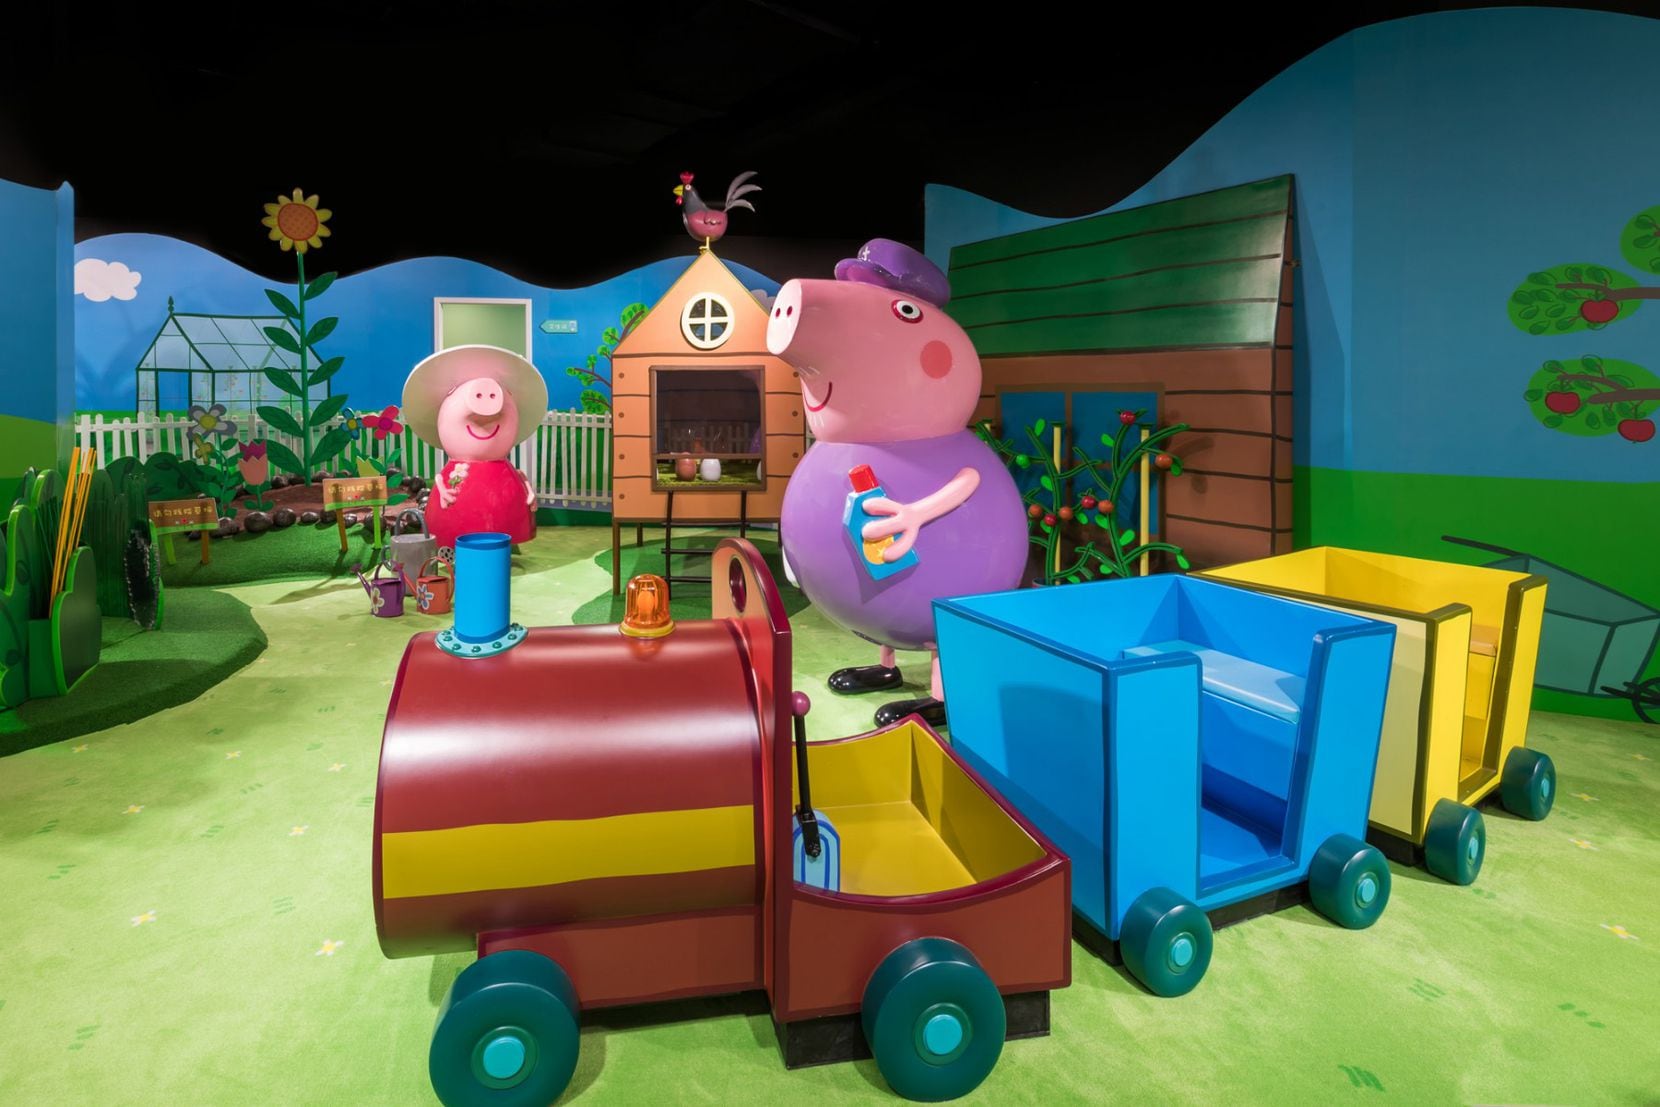 First Peppa Pig play center in U.S. to open next month at Grapevine Mills